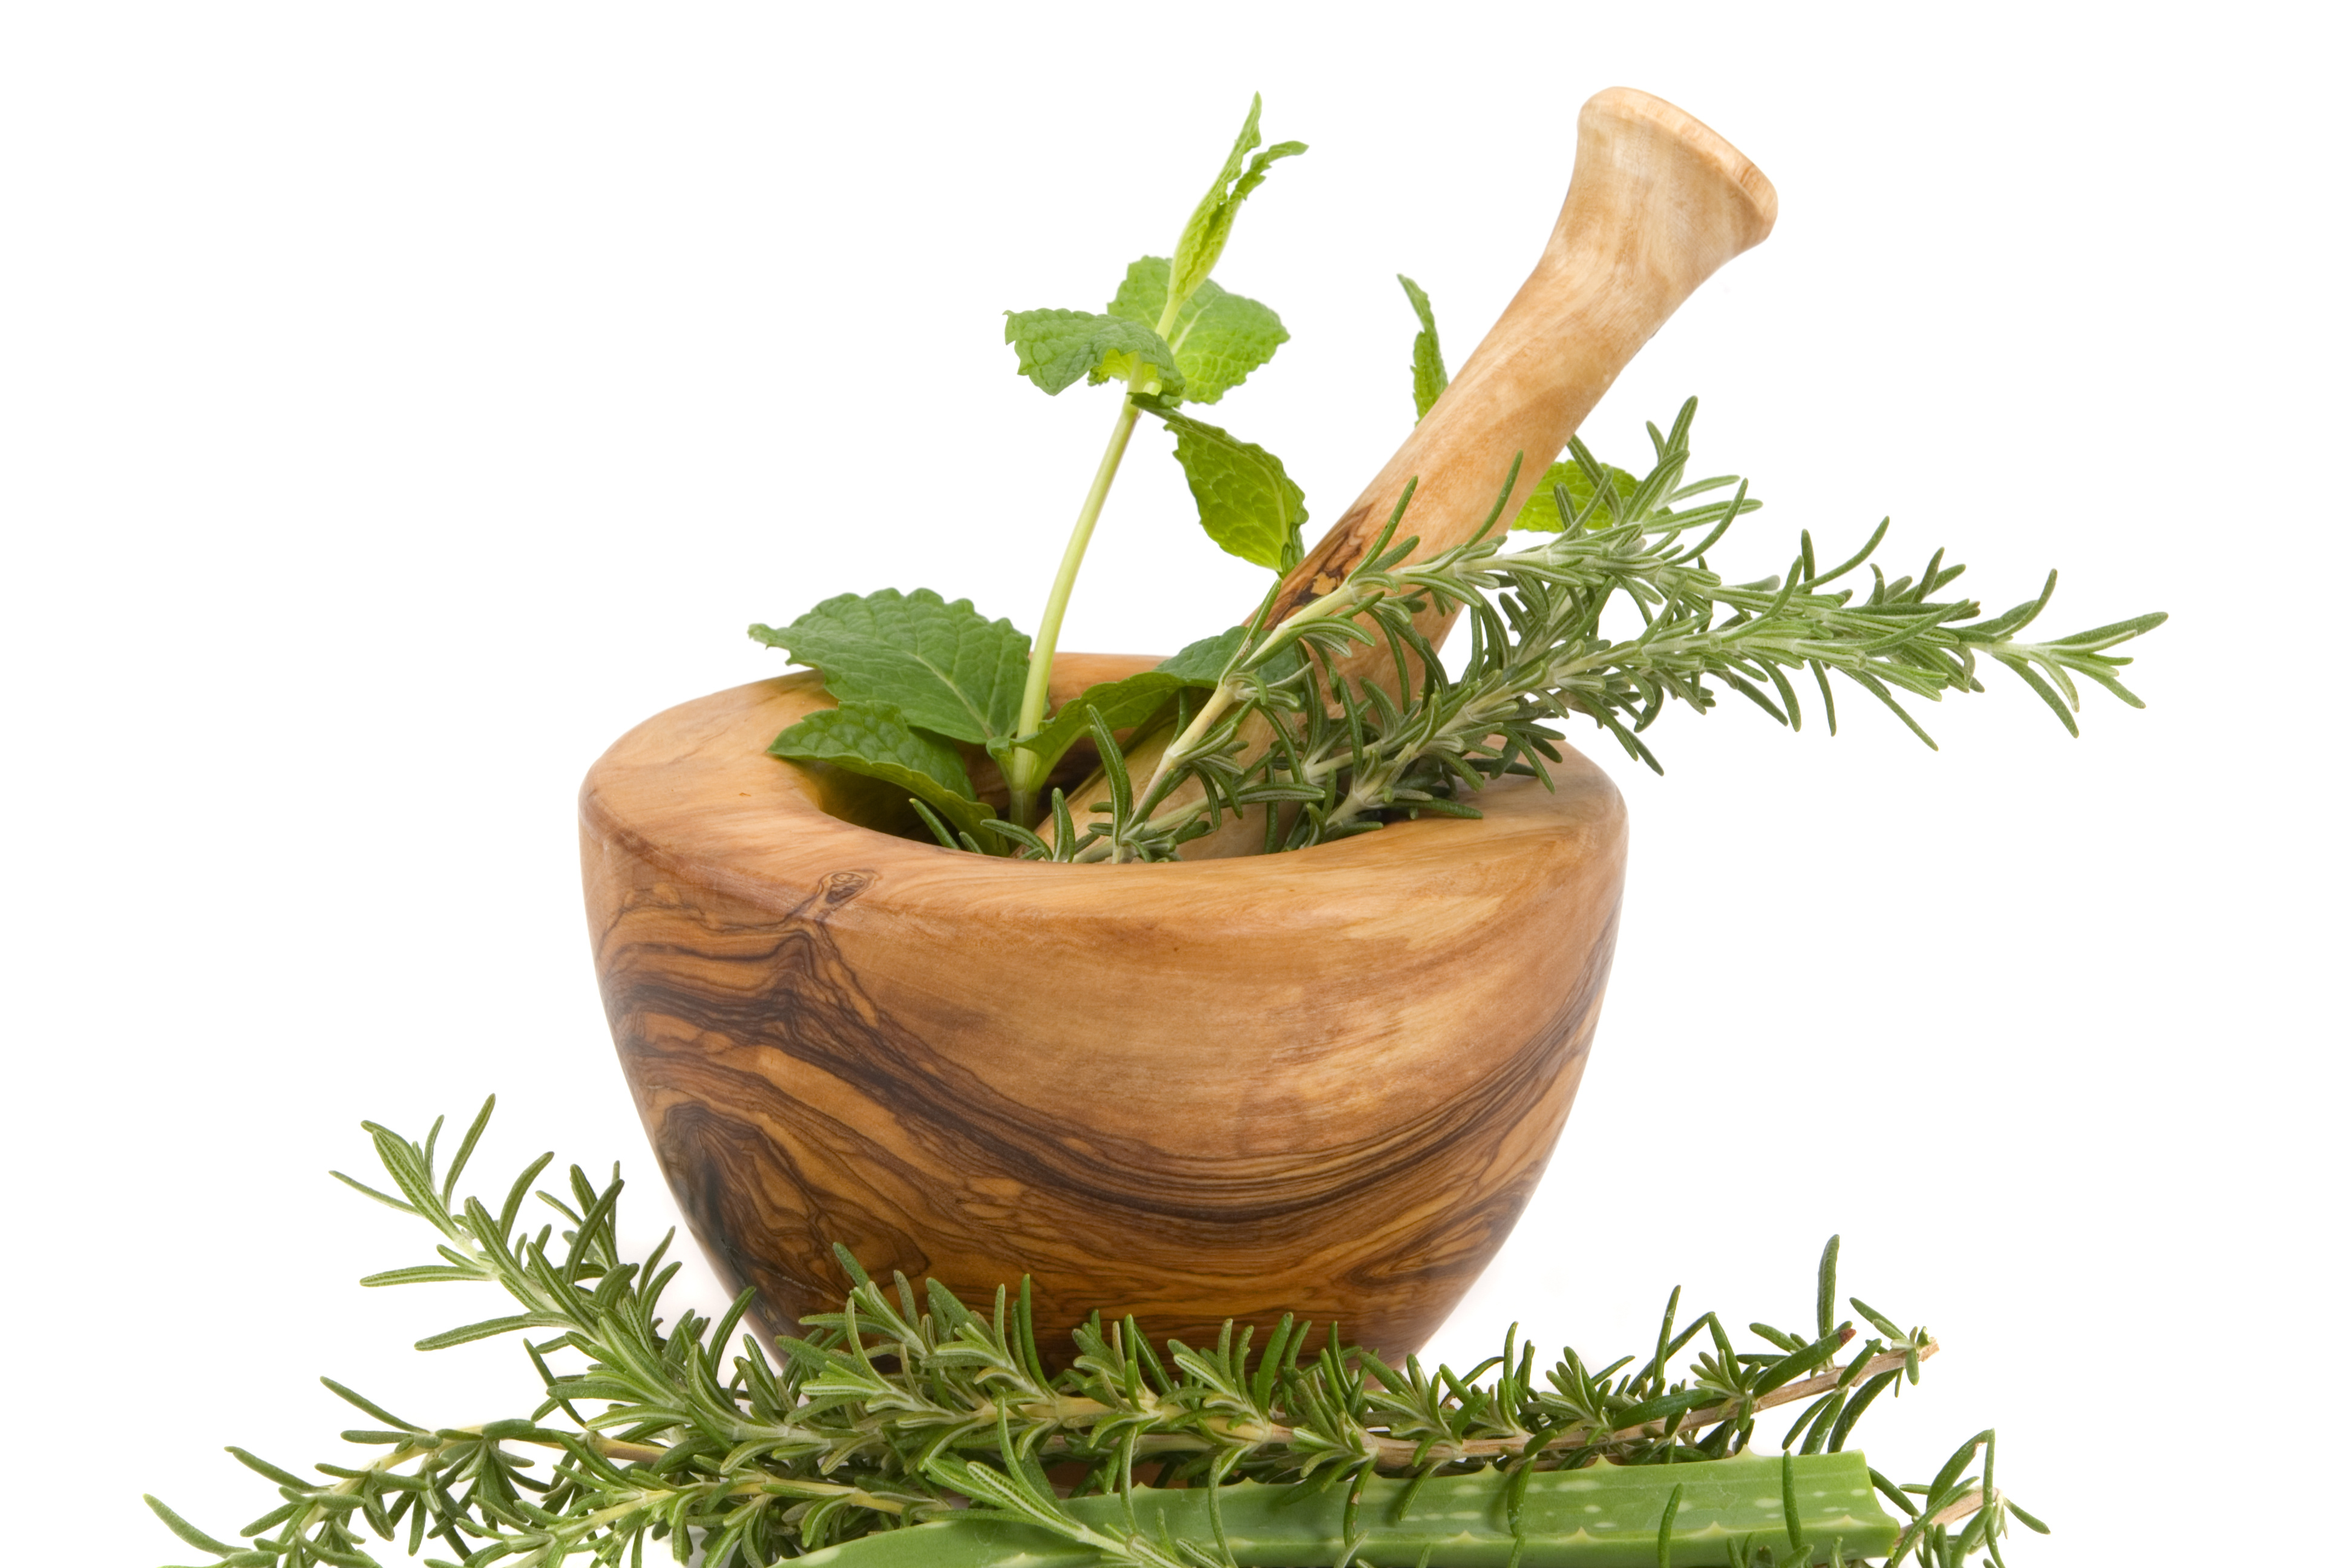 Healing herbs on white background (handcarved olive tree mortar and pestle)